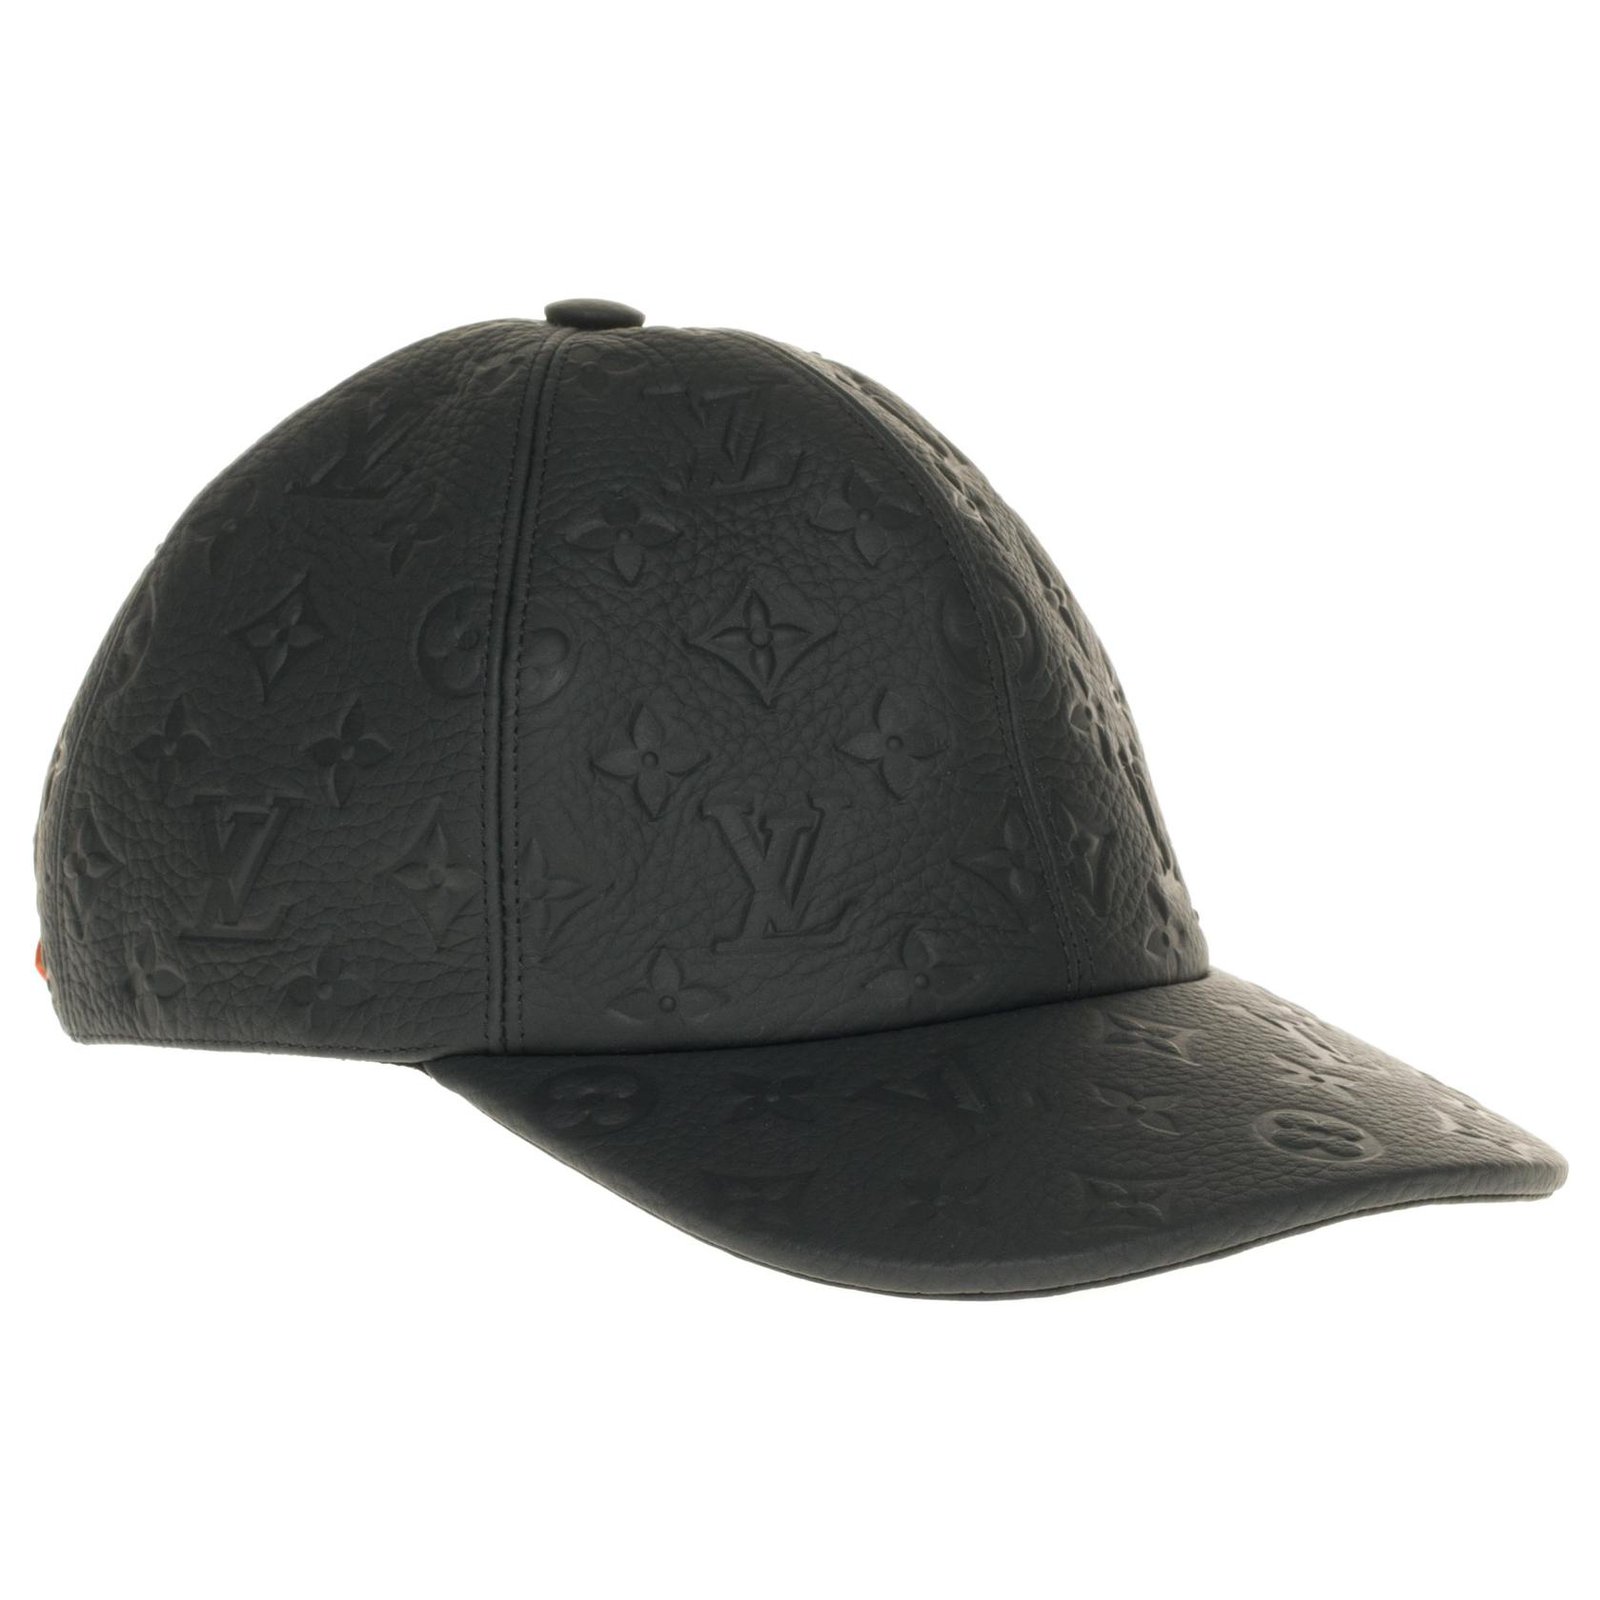 Louis Vuitton cap Limited series of model shows 1.1 in soft